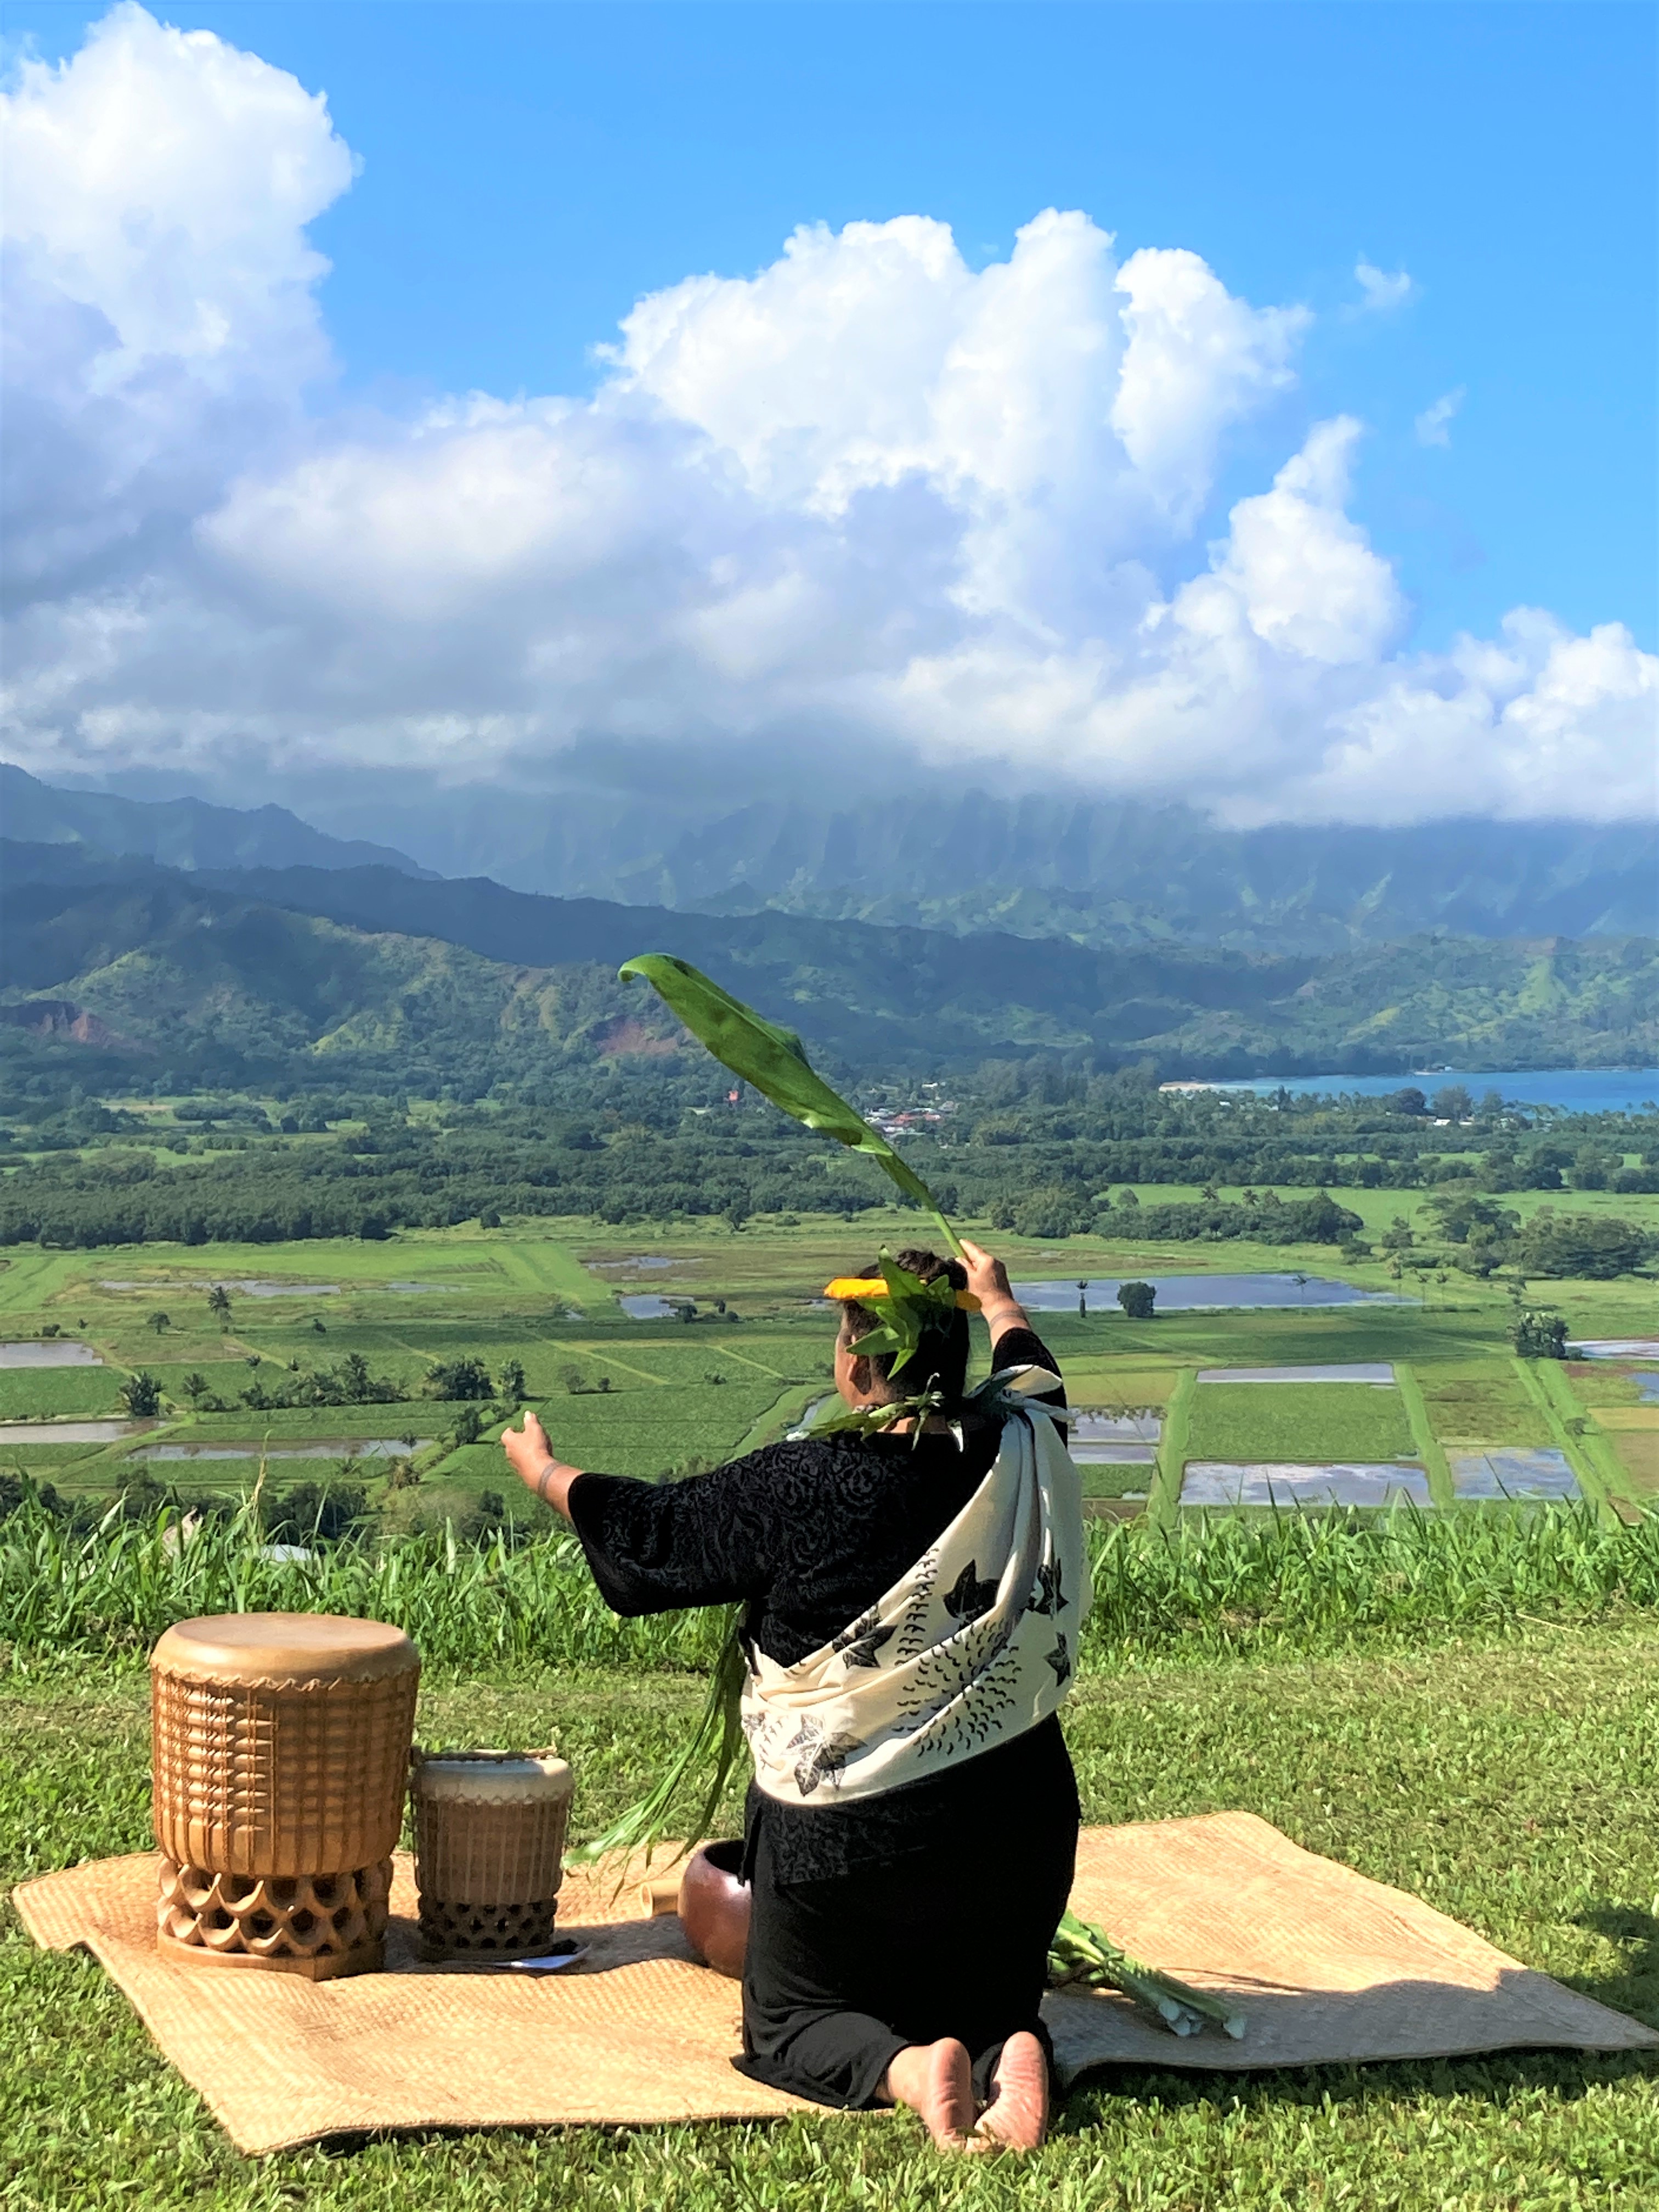 A woman kneels on the ground. She is sitting on a lush grassy hill that overlooks taro fields, mountains, and the ocean.